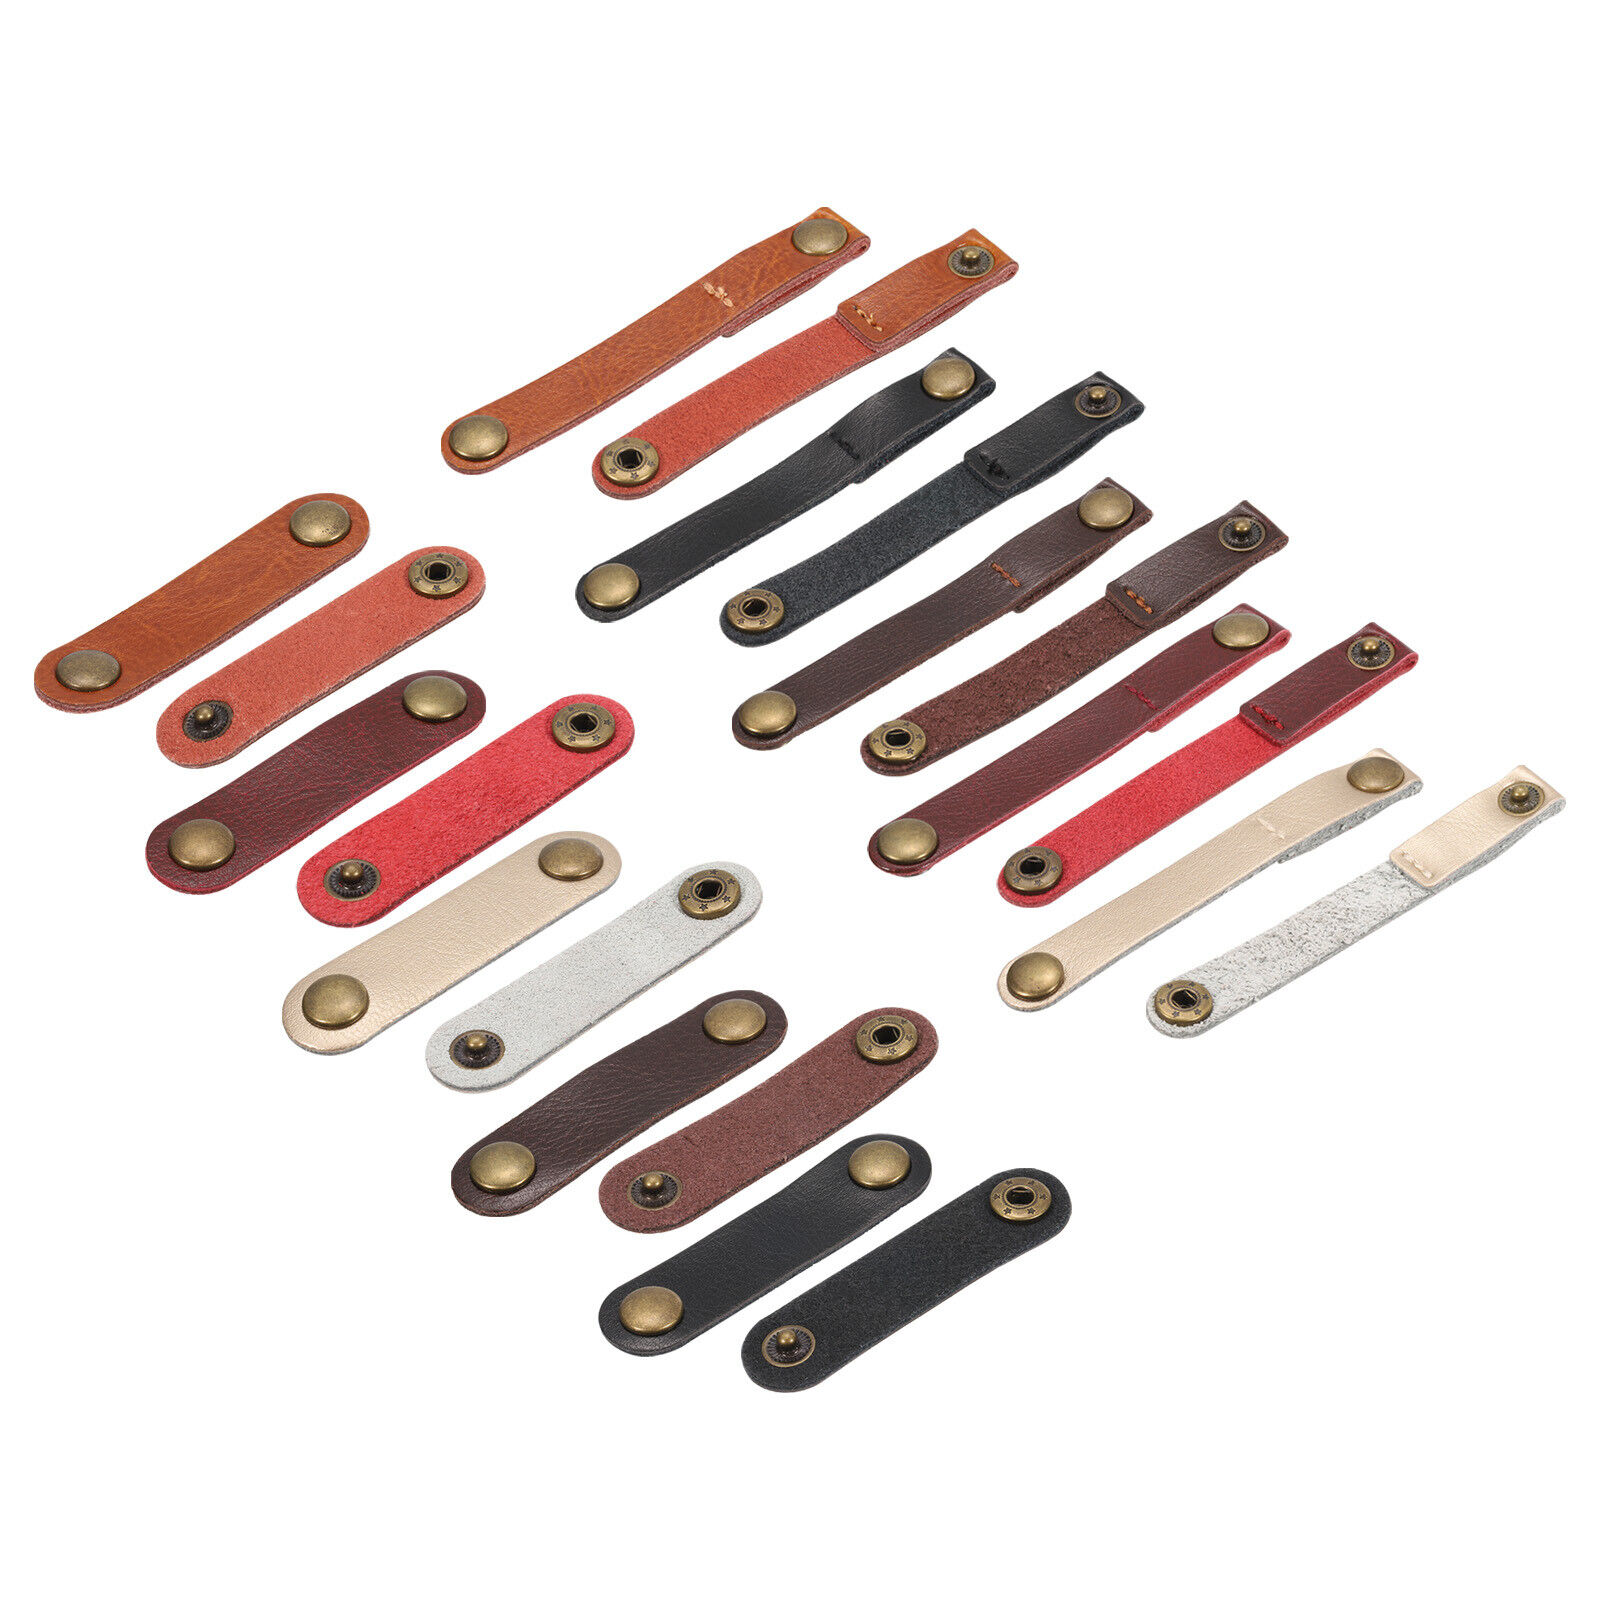 Leather Cable Straps Leather Cable Ties Leather Cord Organizer 5 Color, 10 Pack